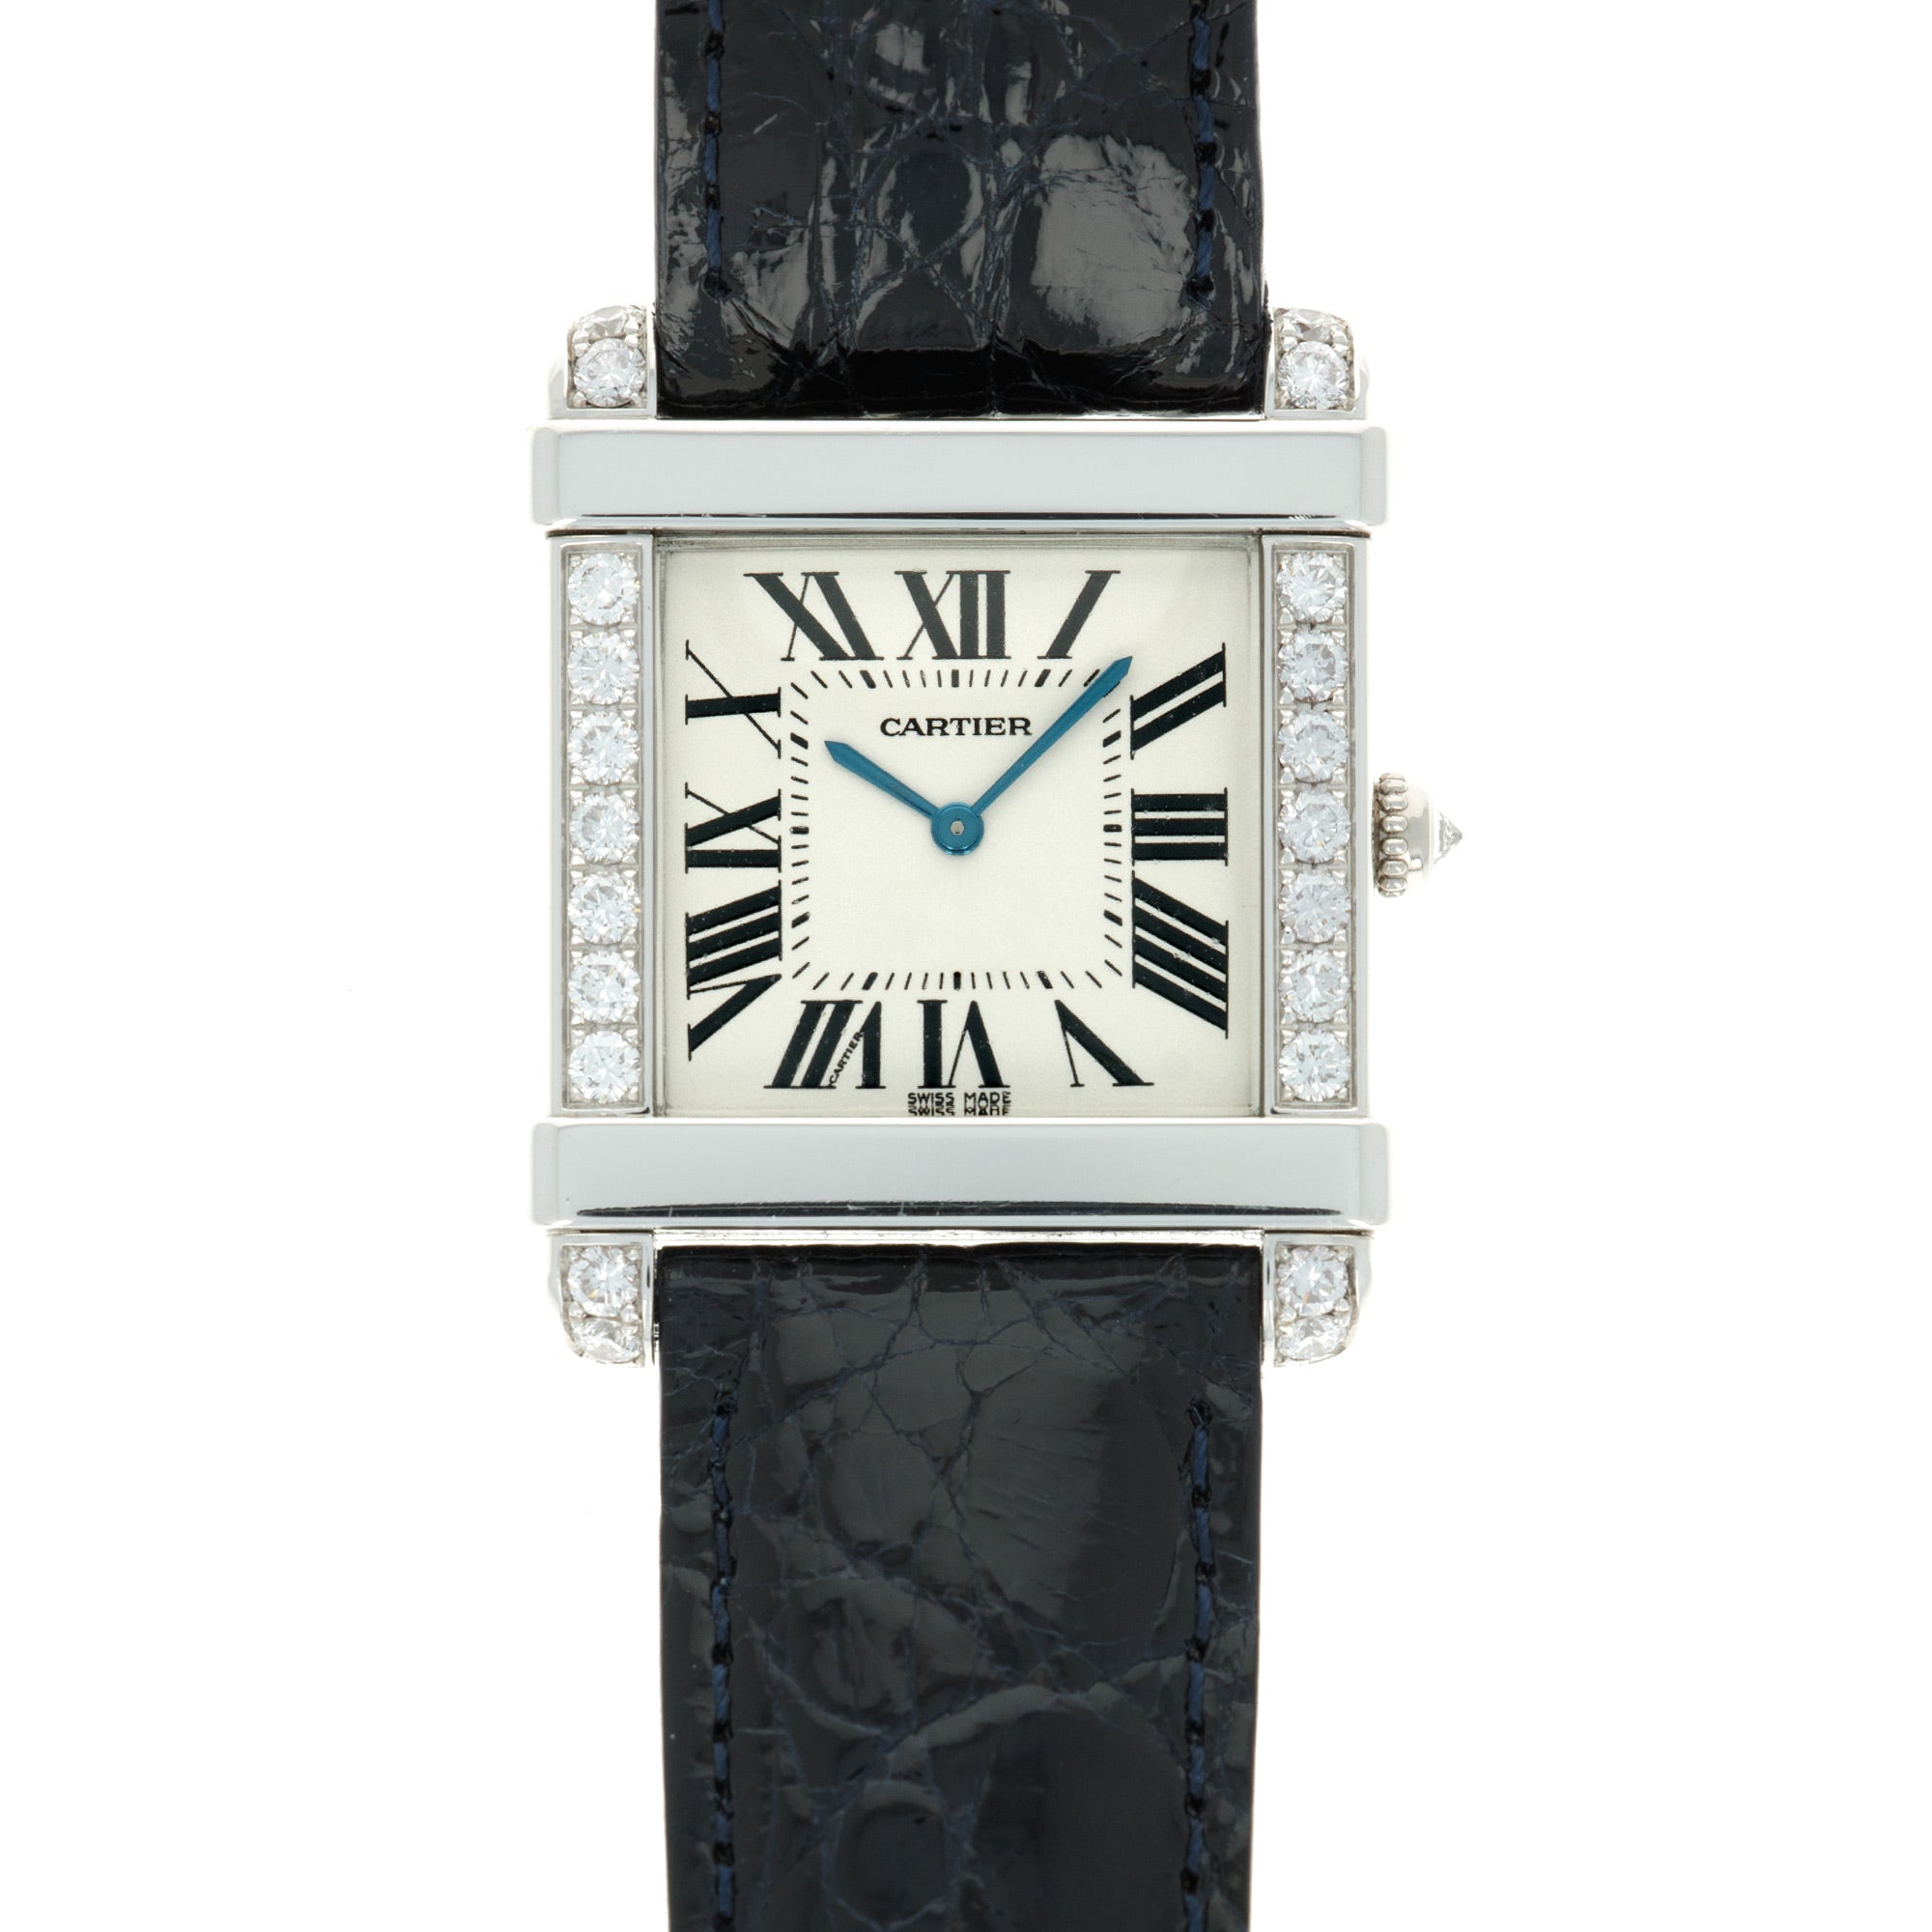 Cartier - Cartier Platinum and Diamond Tank Chinoise Ref. 2685 - The Keystone Watches